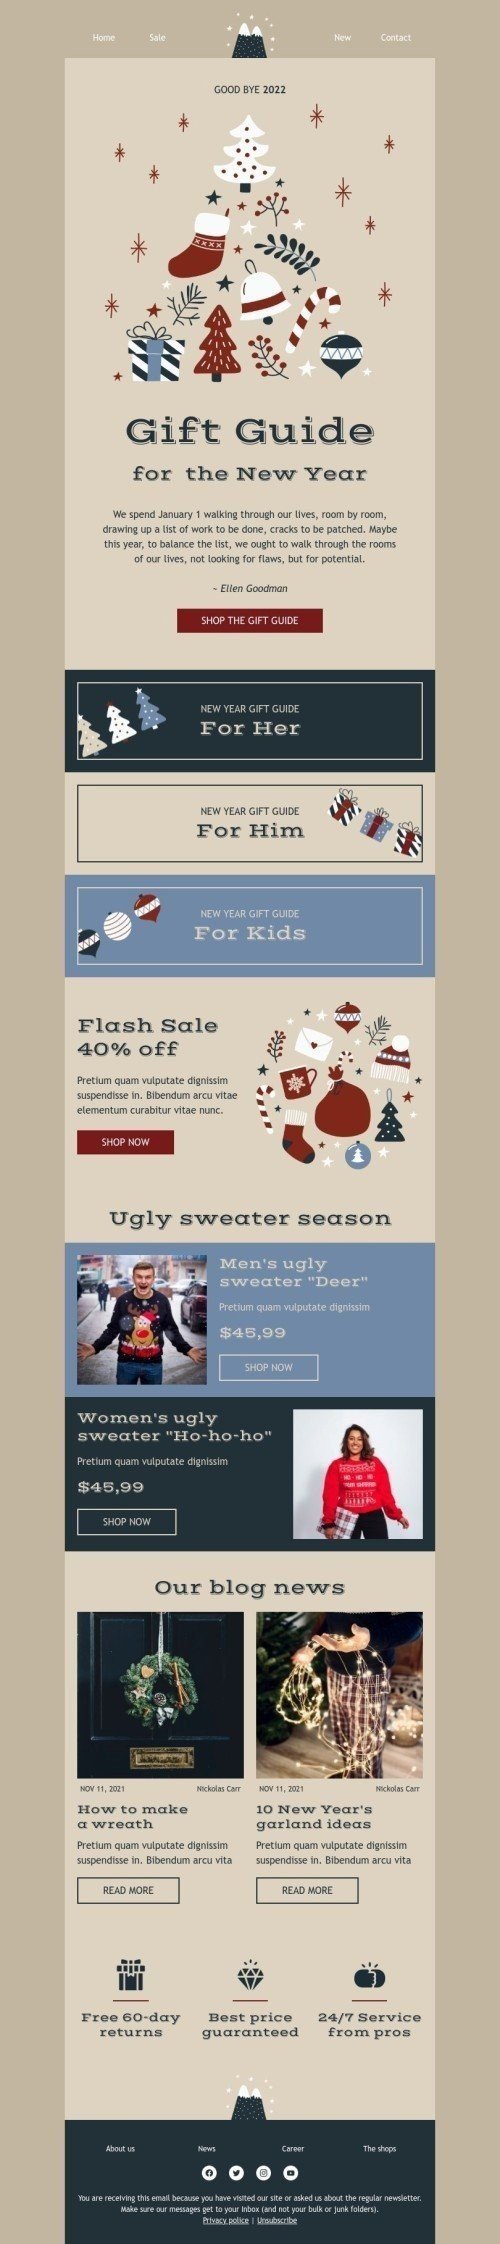 Gift guide for New Year Email Template by Anastasiia Babintseva